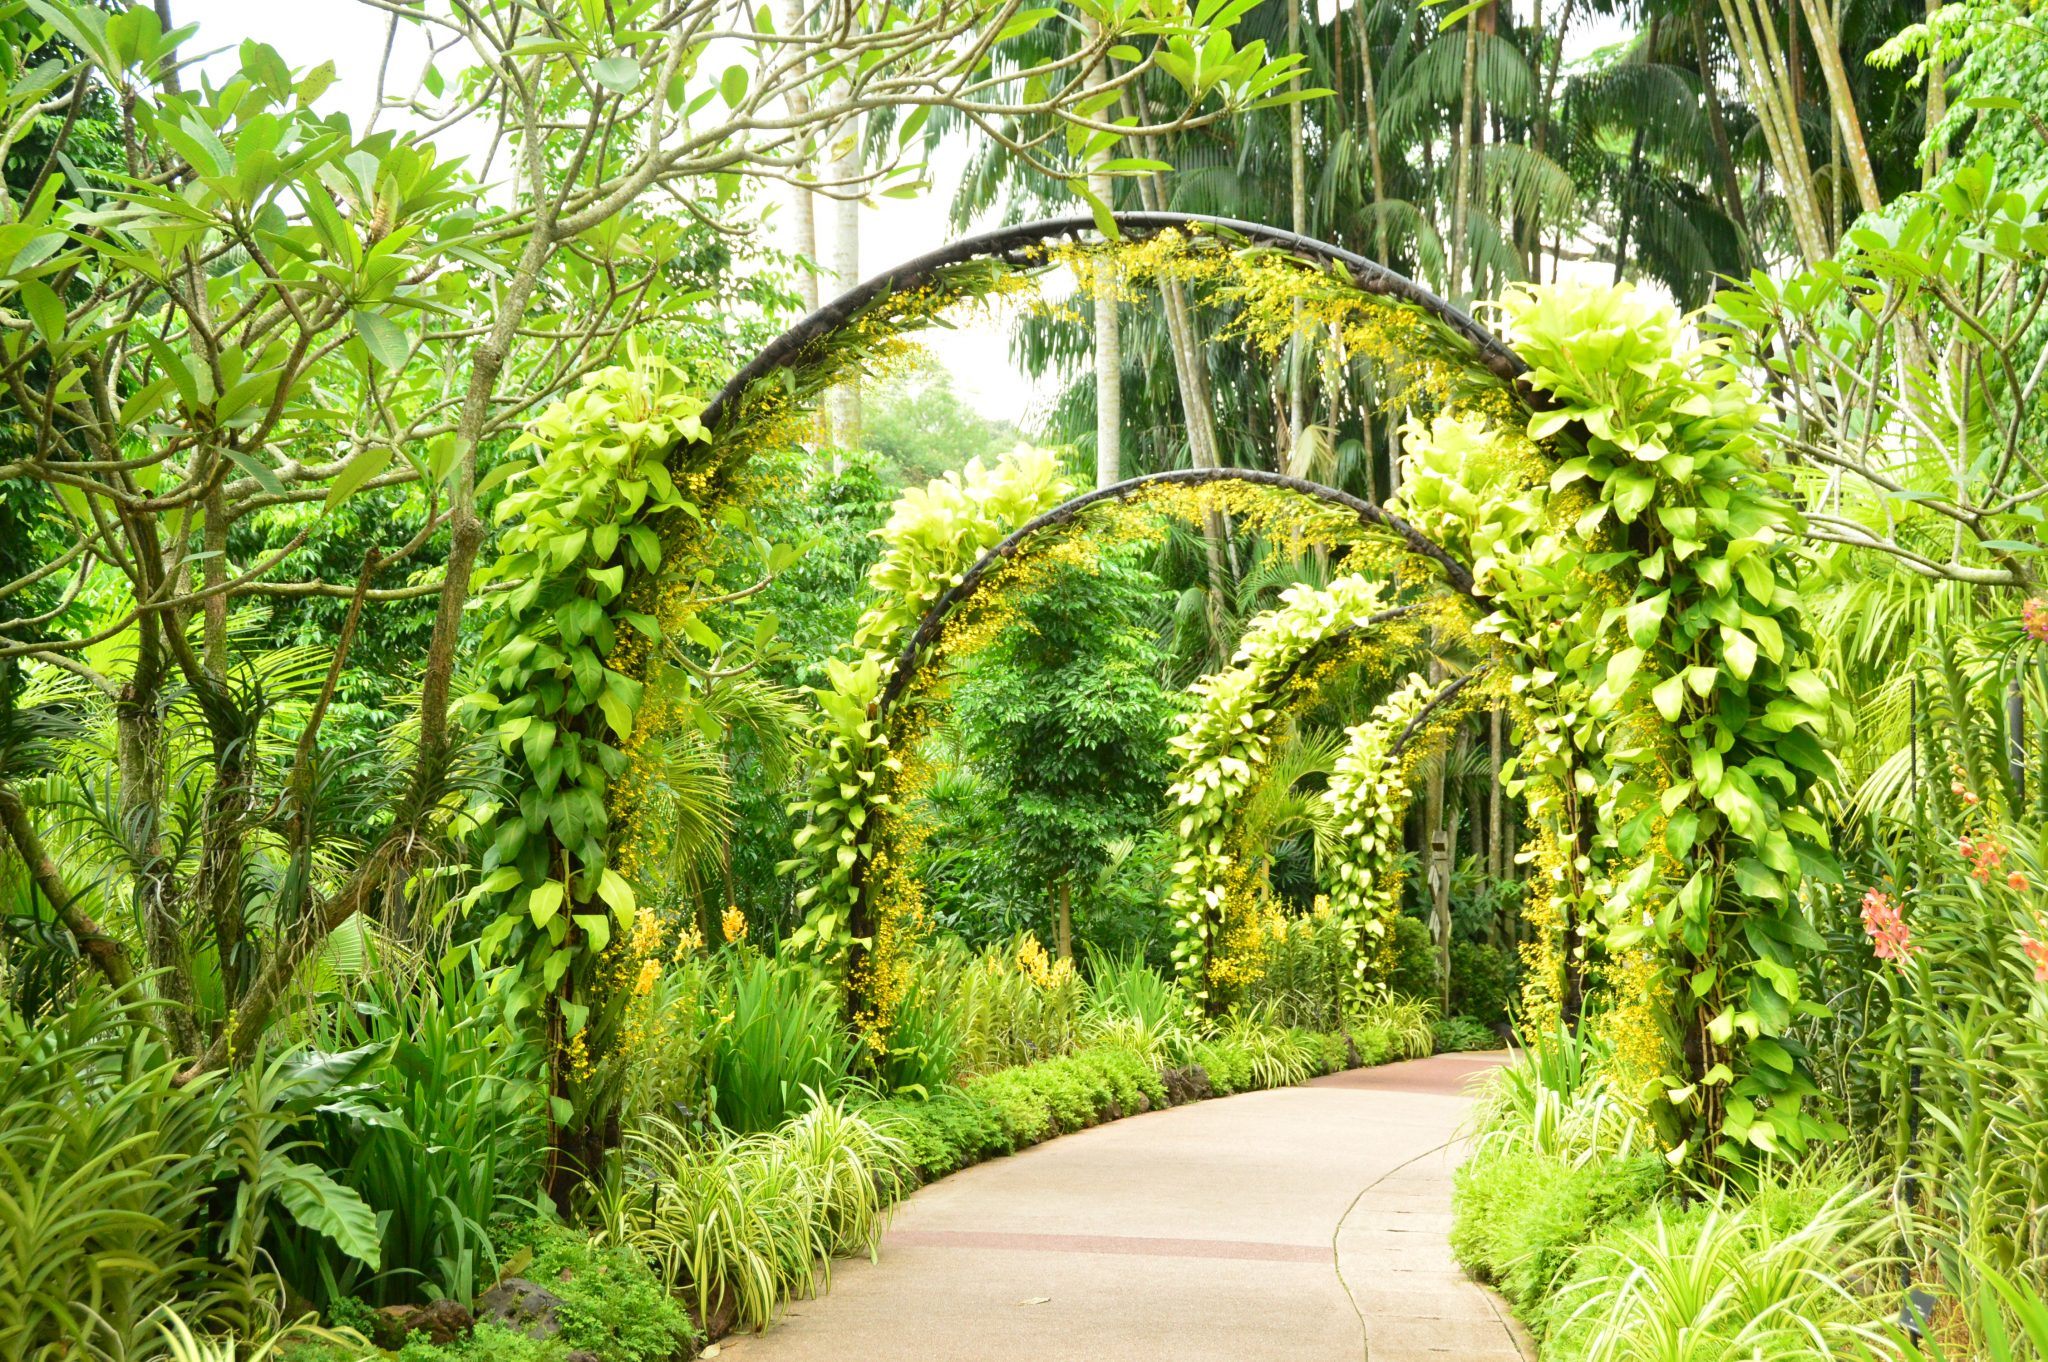 National Orchid Garden in the Singapore Botanic Gardens